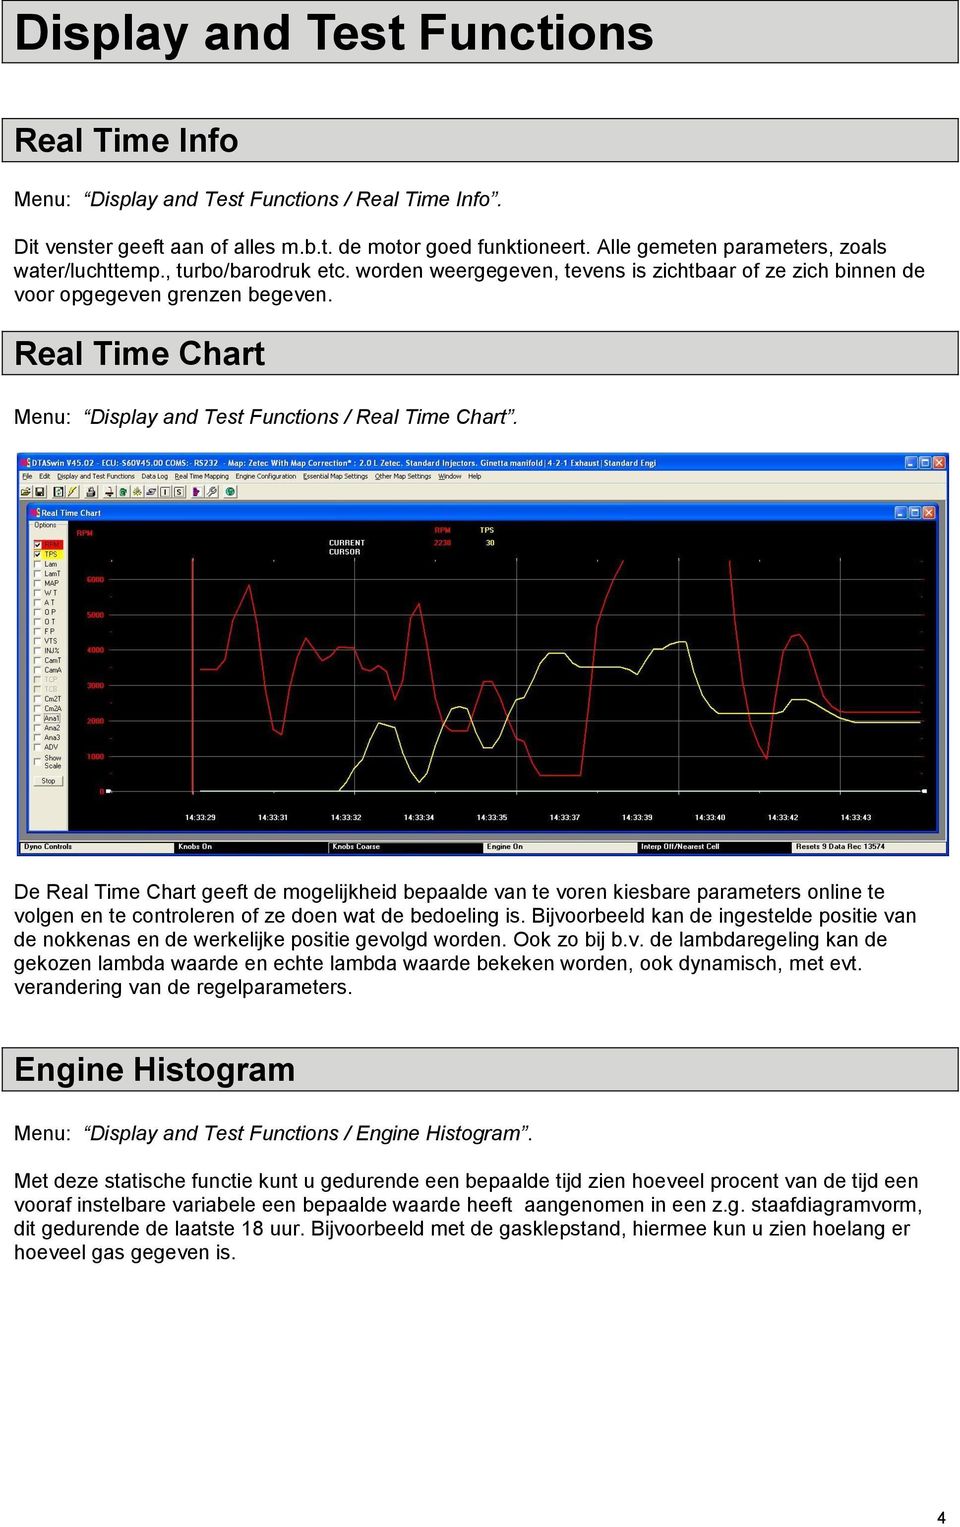 Real Time Chart Menu: Display and Test Functions / Real Time Chart.